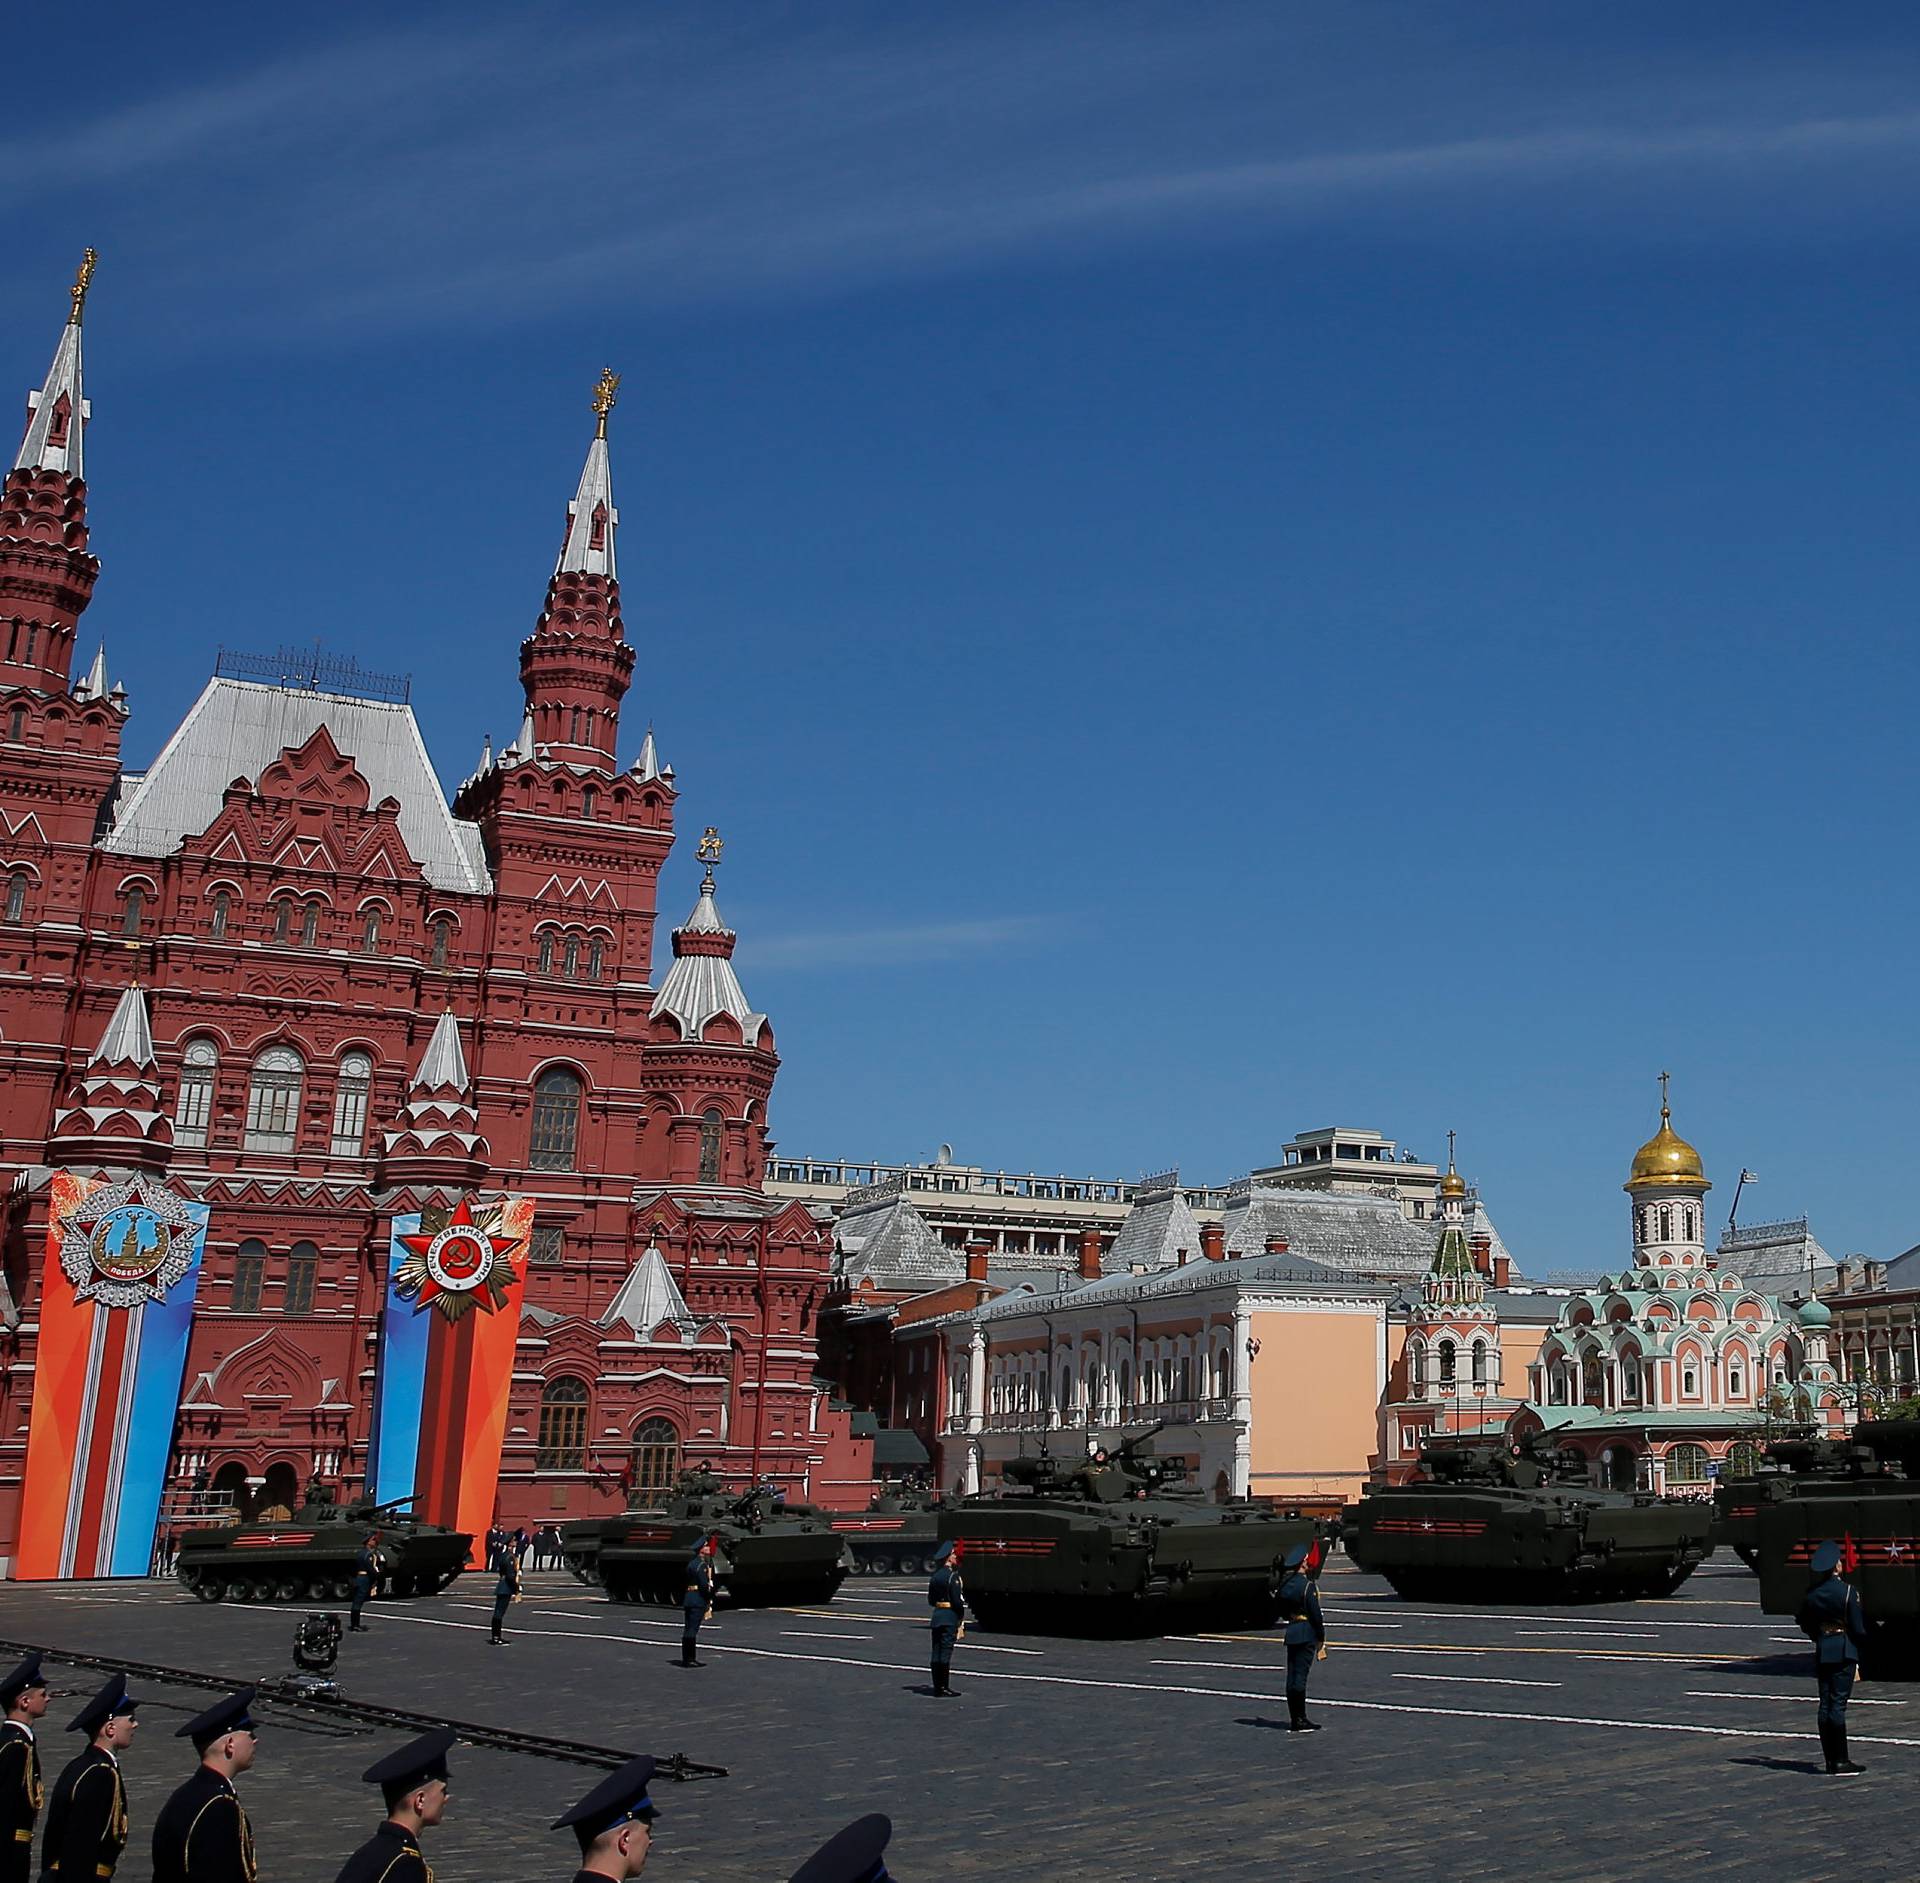 Russian servicemen drive military vehicles during the Victory Day parade at Red Square in Moscow